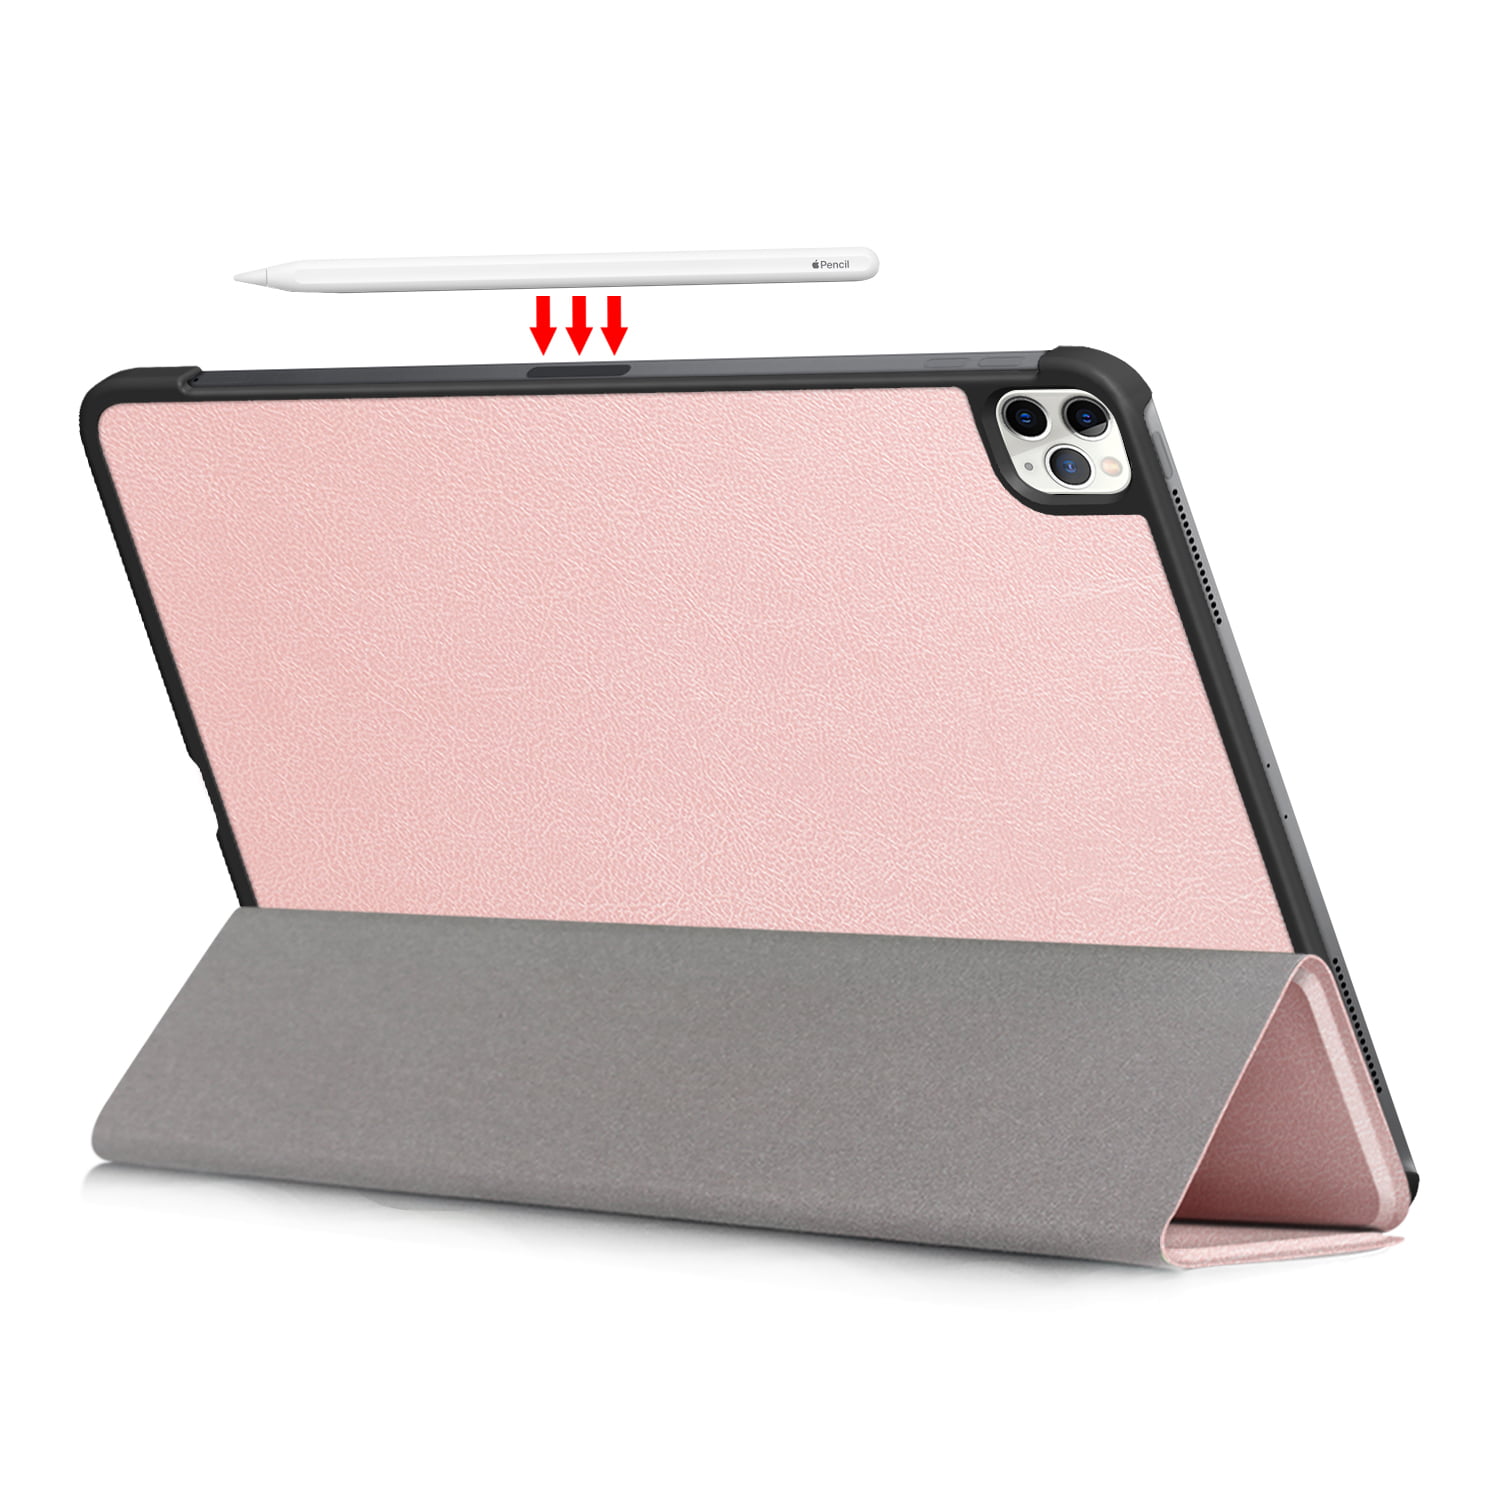 Allytech iPad Pro 2020 Case 2nd Slim Lightweight [Support Apple Charging] Auto Sleep Wake Trifold Stand Protective Smart Cover Case for Apple iPad Pro 11 Inch 2020 - Rosegold Walmart.com